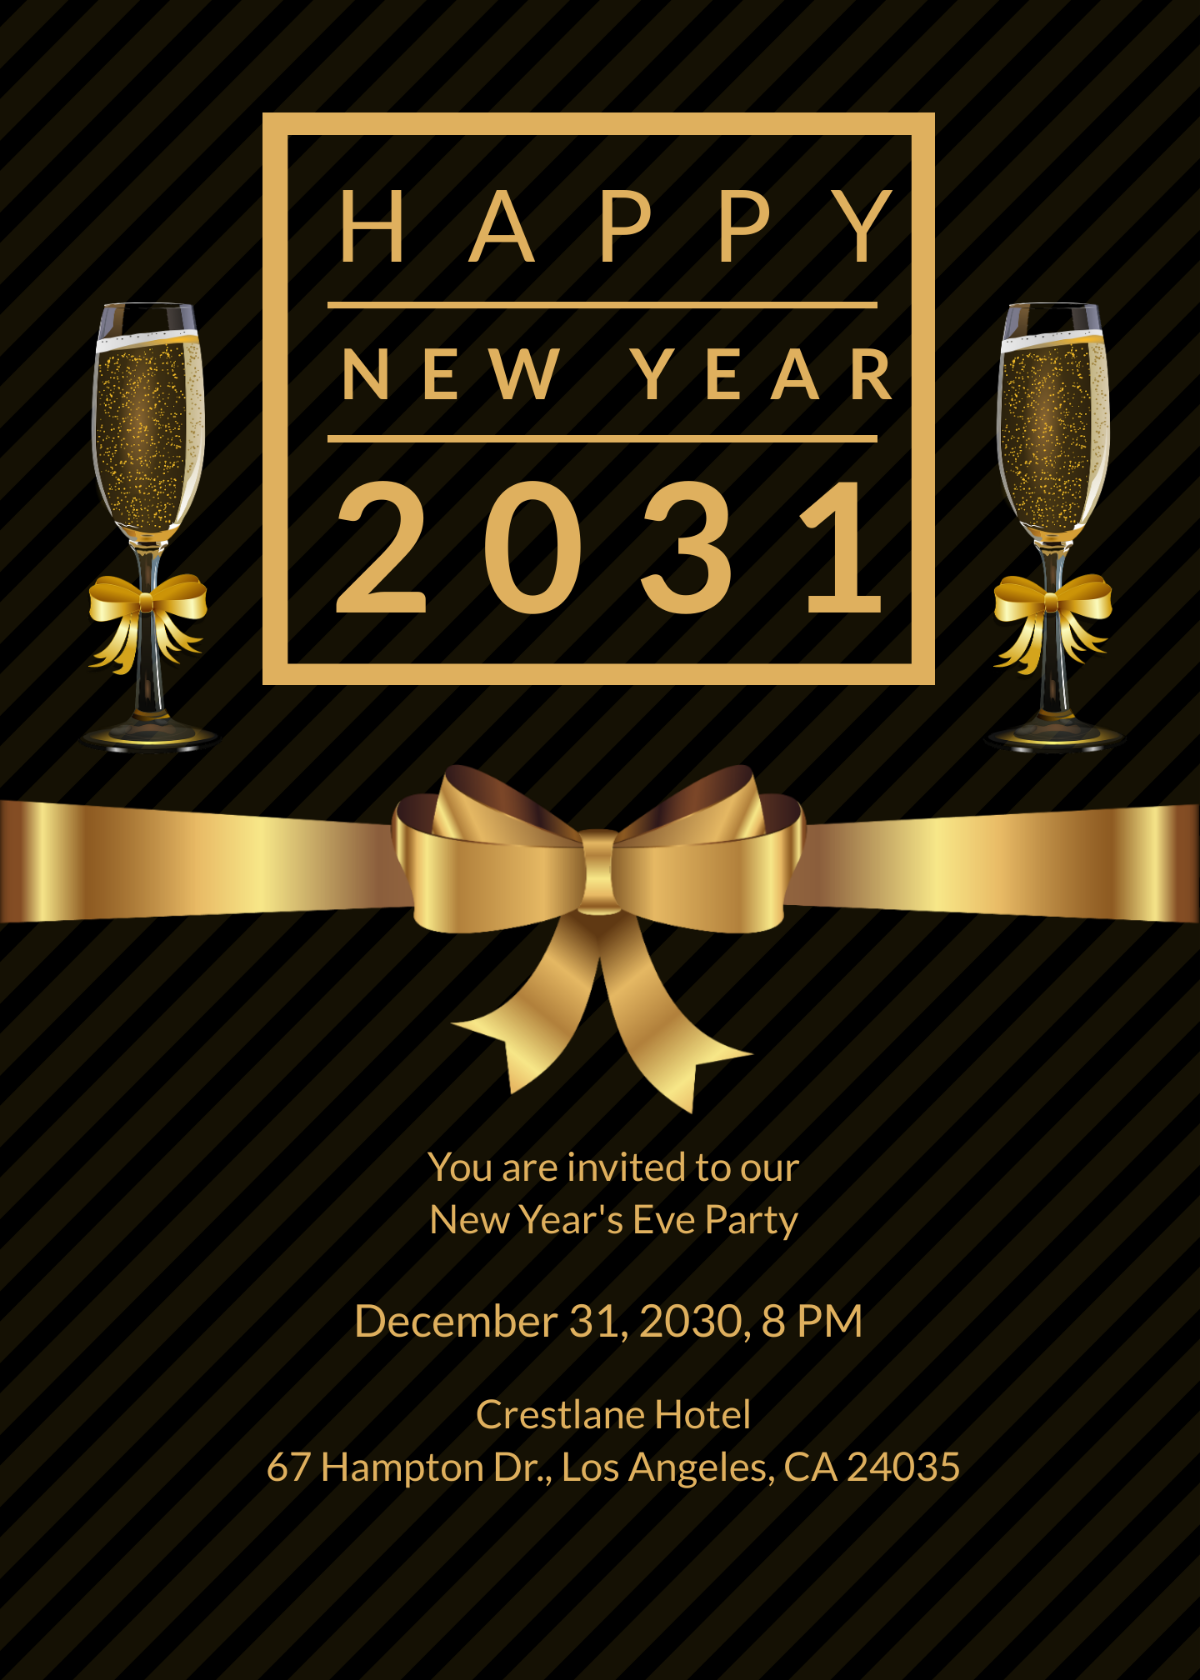 free-new-year-party-invitation-edit-online-download-template